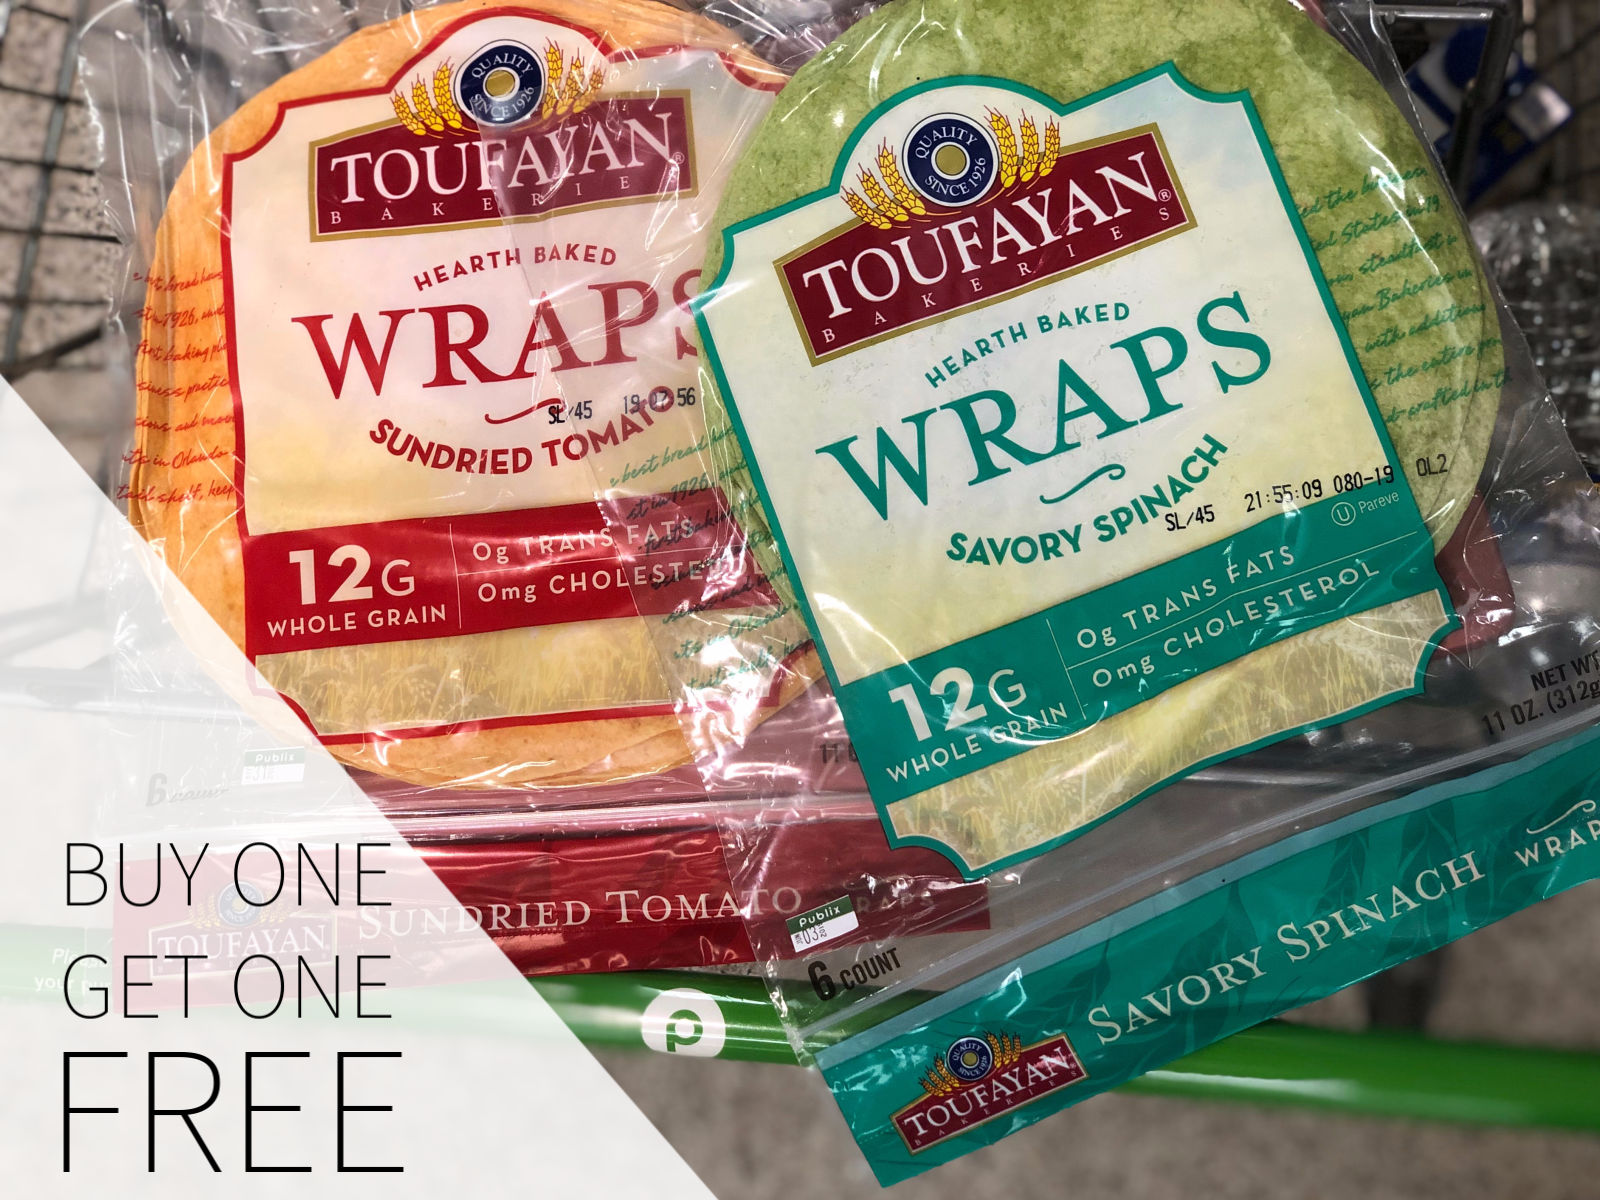 Your Favorite Toufayan Wraps Are Buy One, Get One FREE At Publix